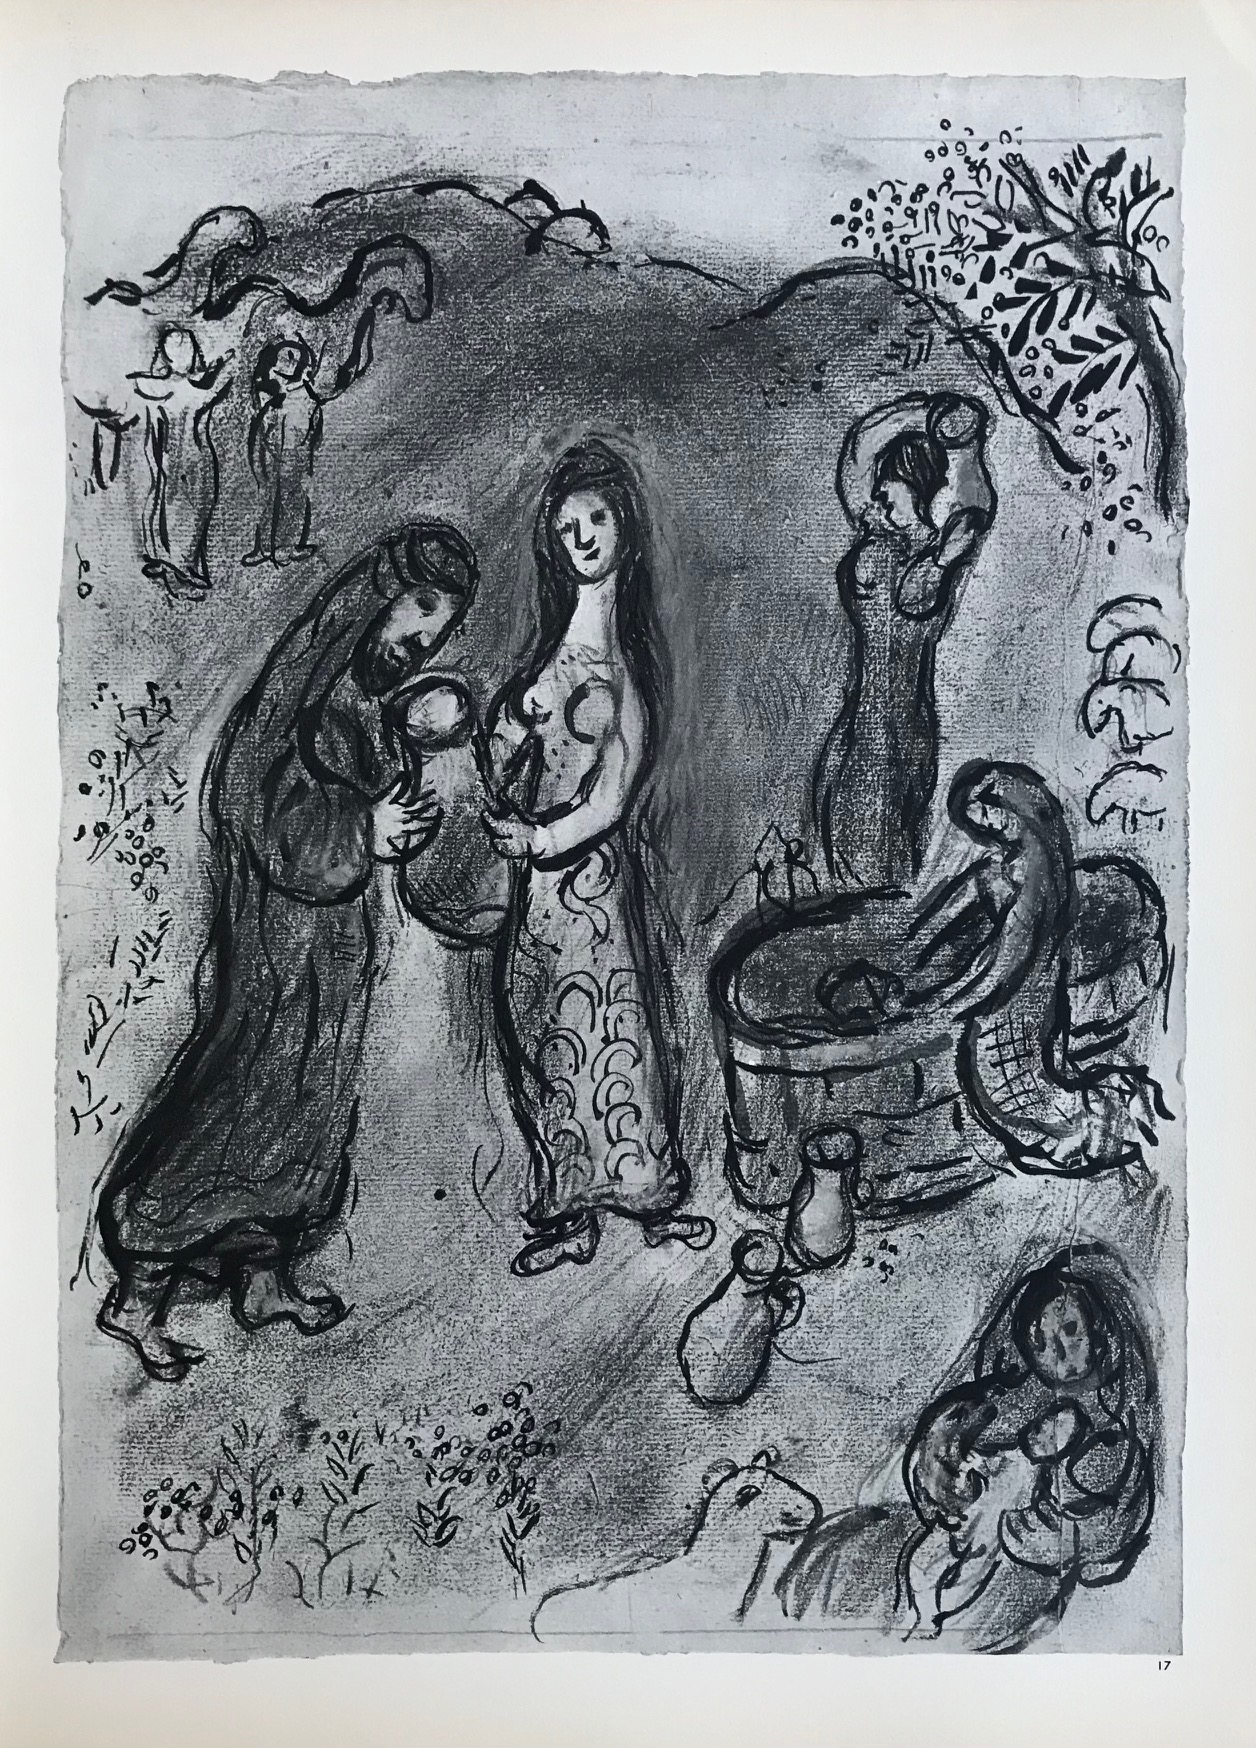 Chagall P17 The Bible Rebekah Gives drink 1960 P17 The Bible Rebekah Gives drink 1960 Rebehah gives drink to the servant of Abraham